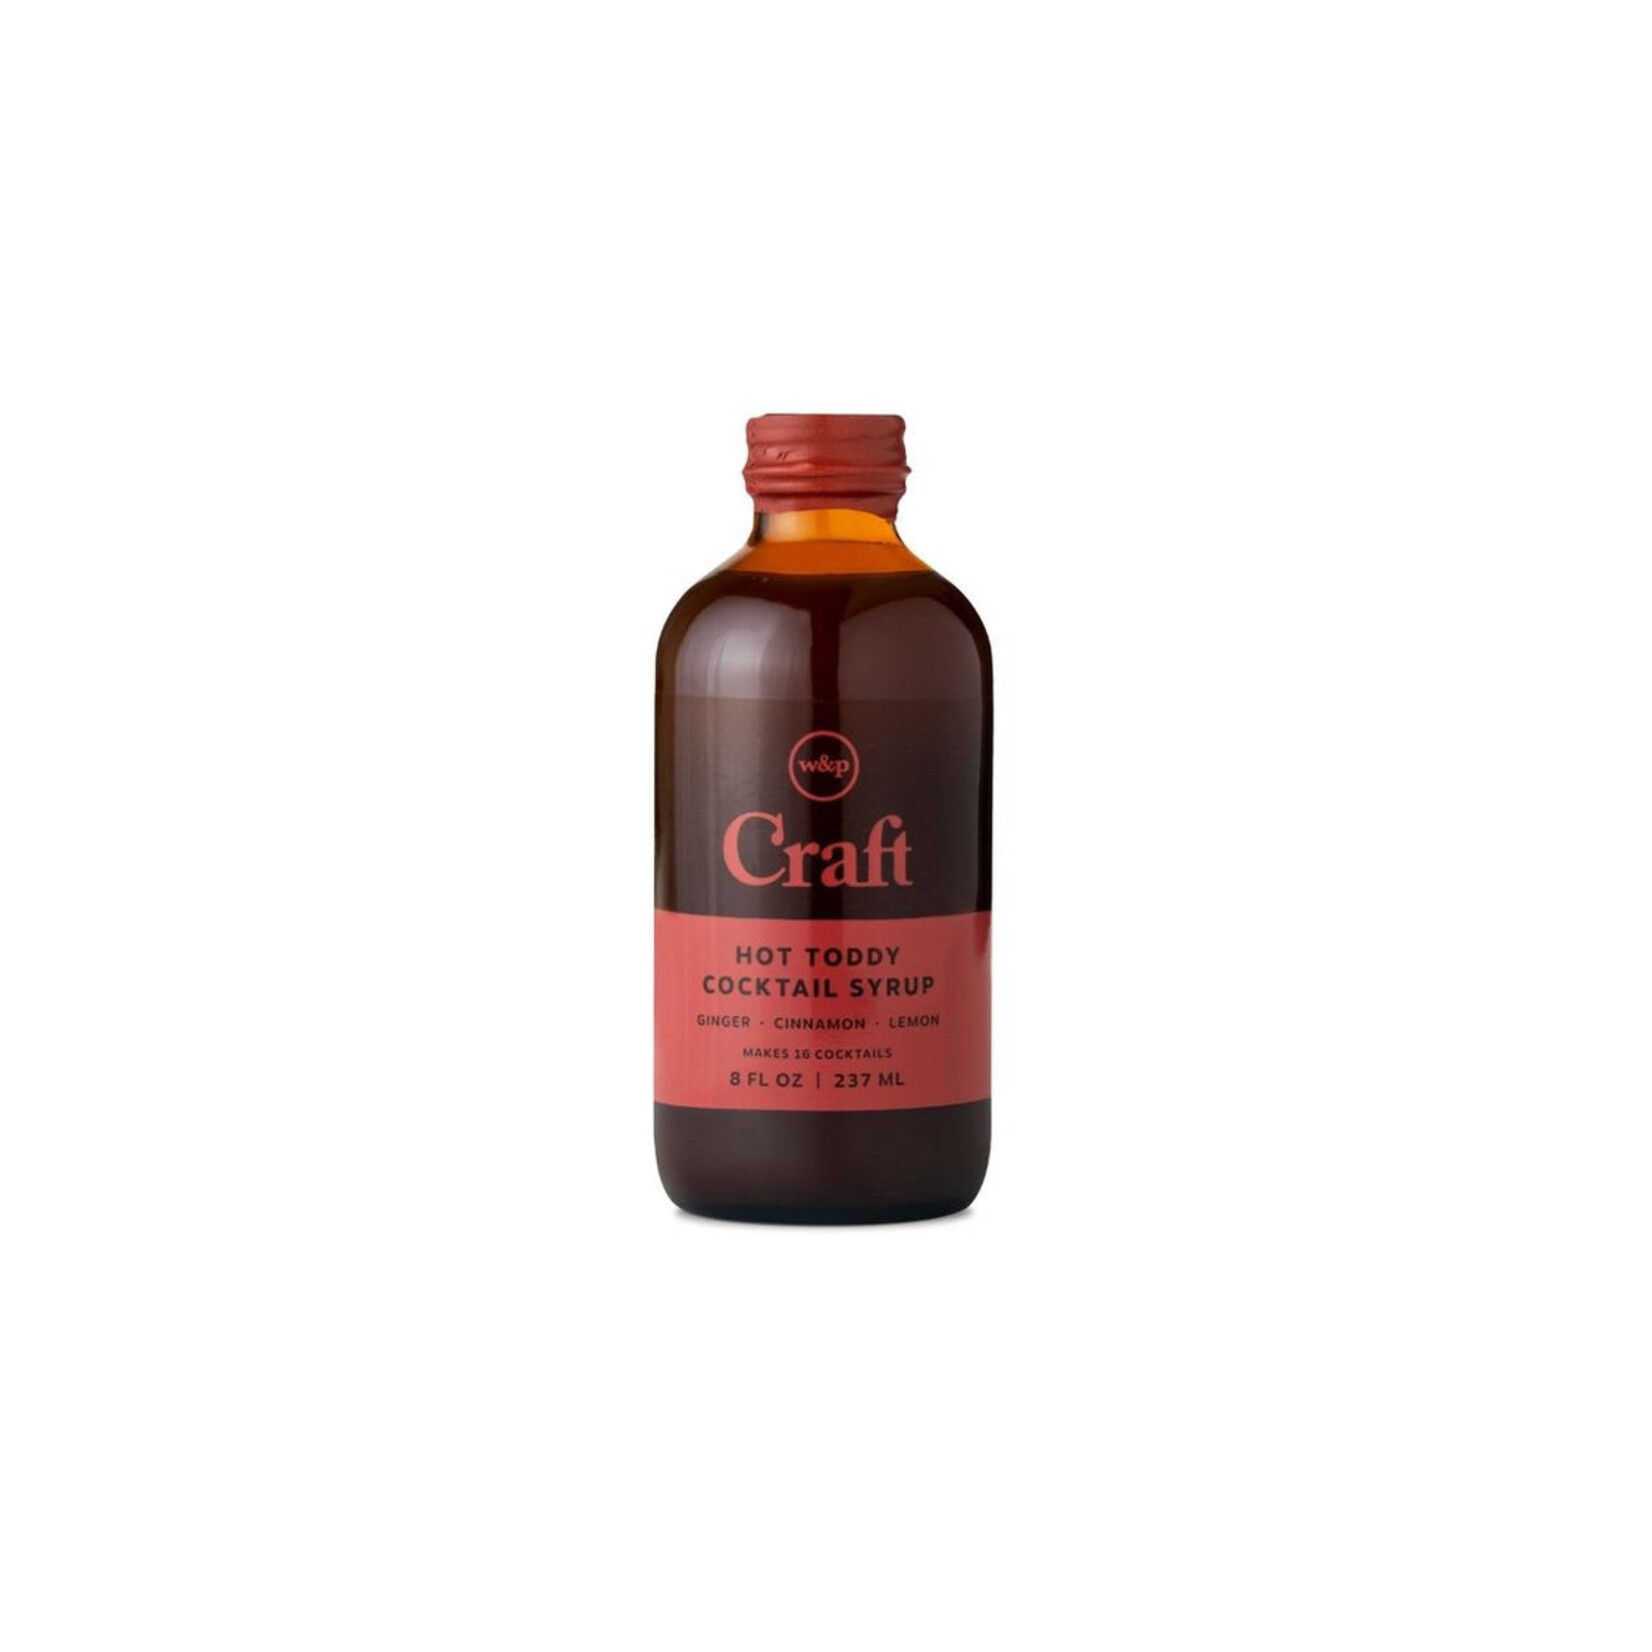 W&P Craft Hot Toddy Cocktail Syrup 8oz